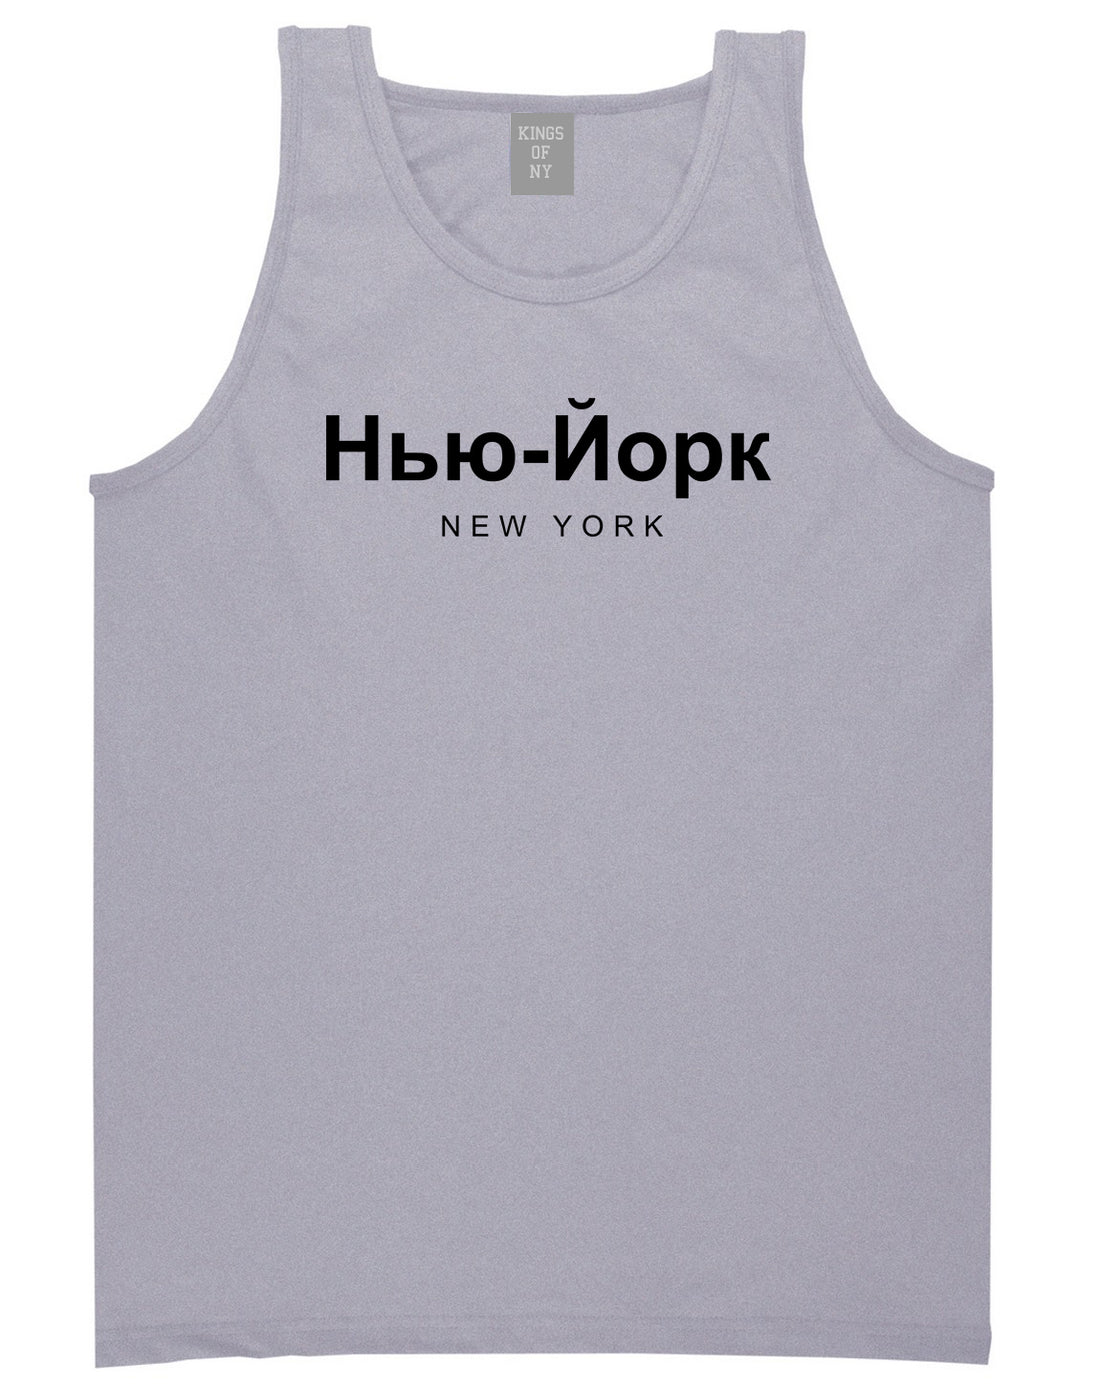 New York In Russian Mens Tank Top Shirt Grey by Kings Of NY